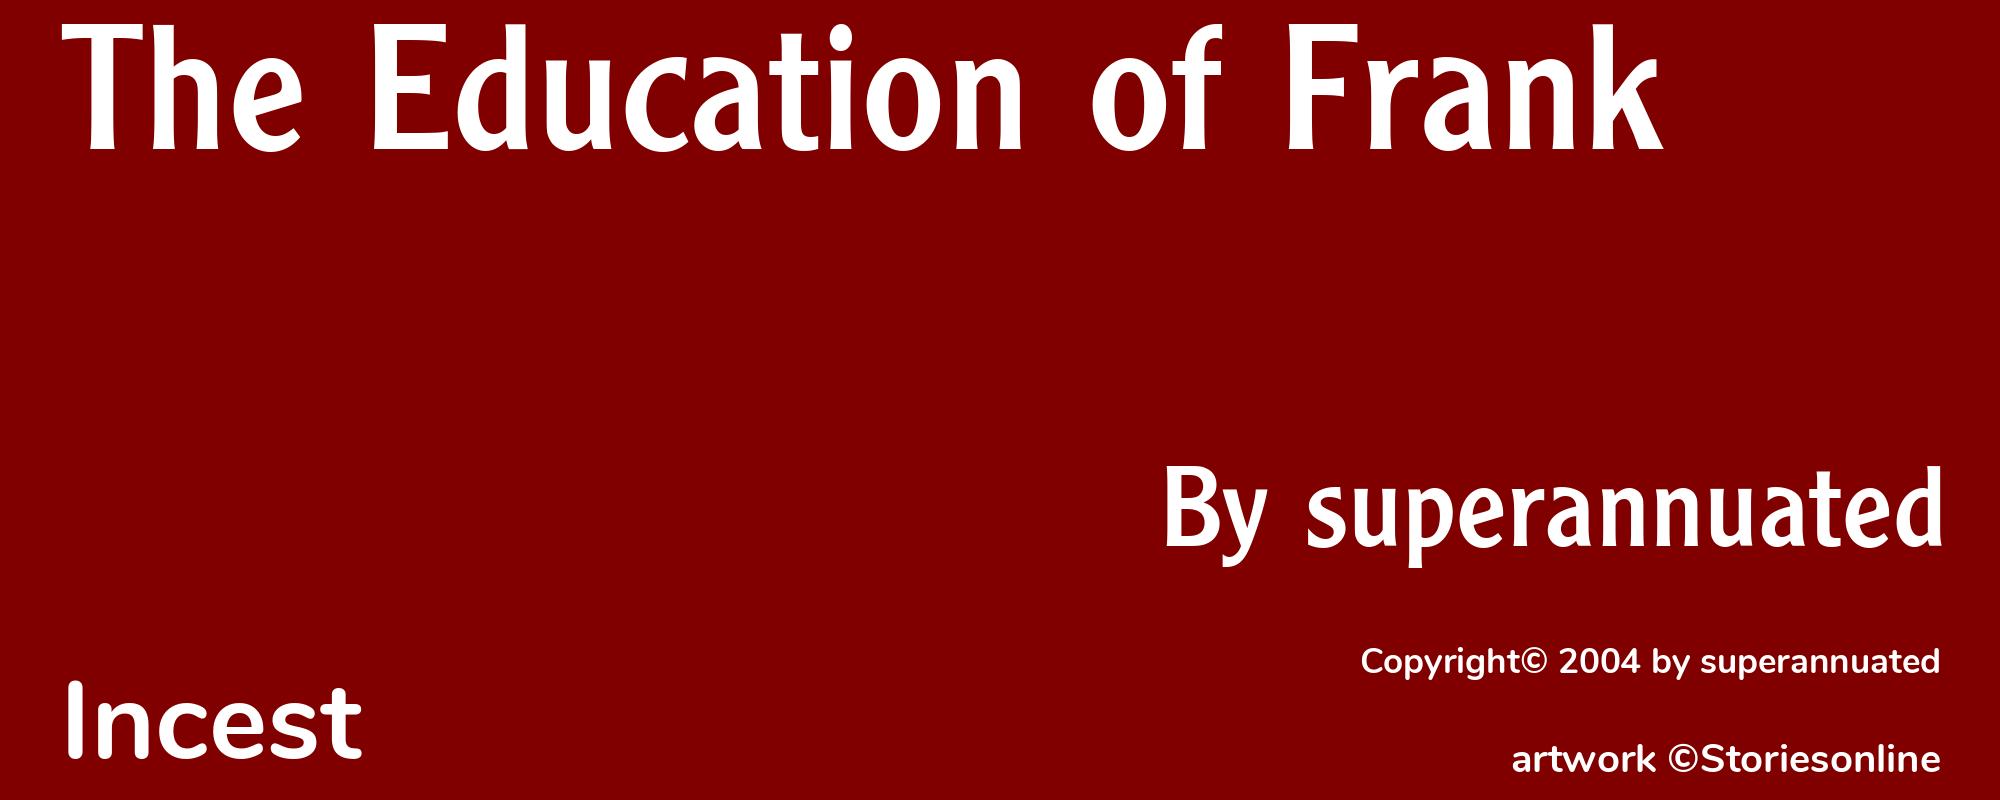 The Education of Frank - Cover